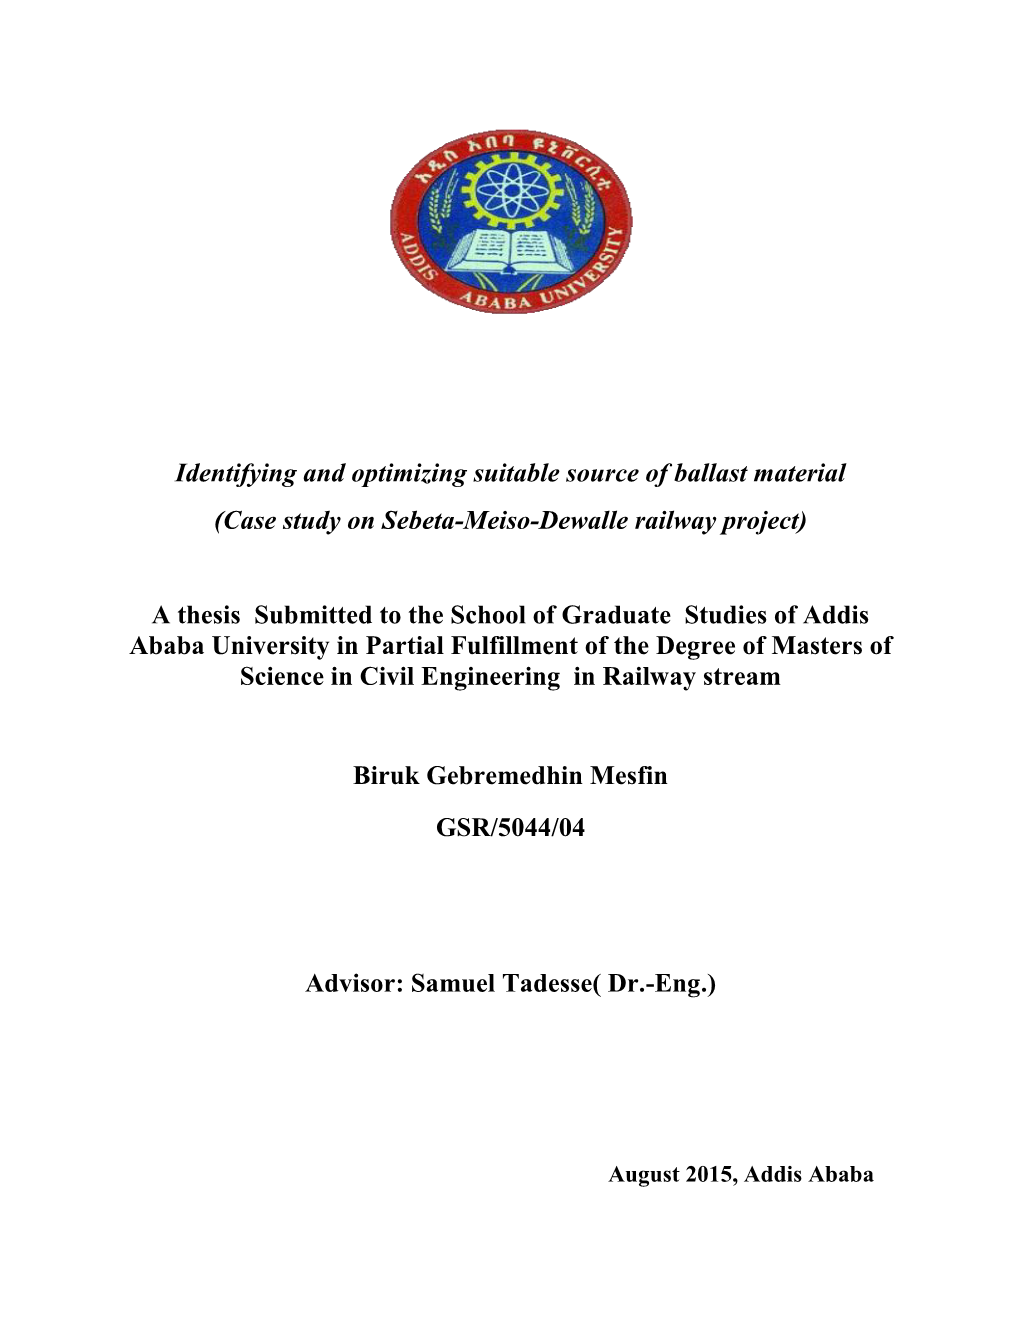 Identifying and Optimizing Suitable Source of Ballast Material (Case Study on Sebeta-Meiso-Dewalle Railway Project) a Thesis Su